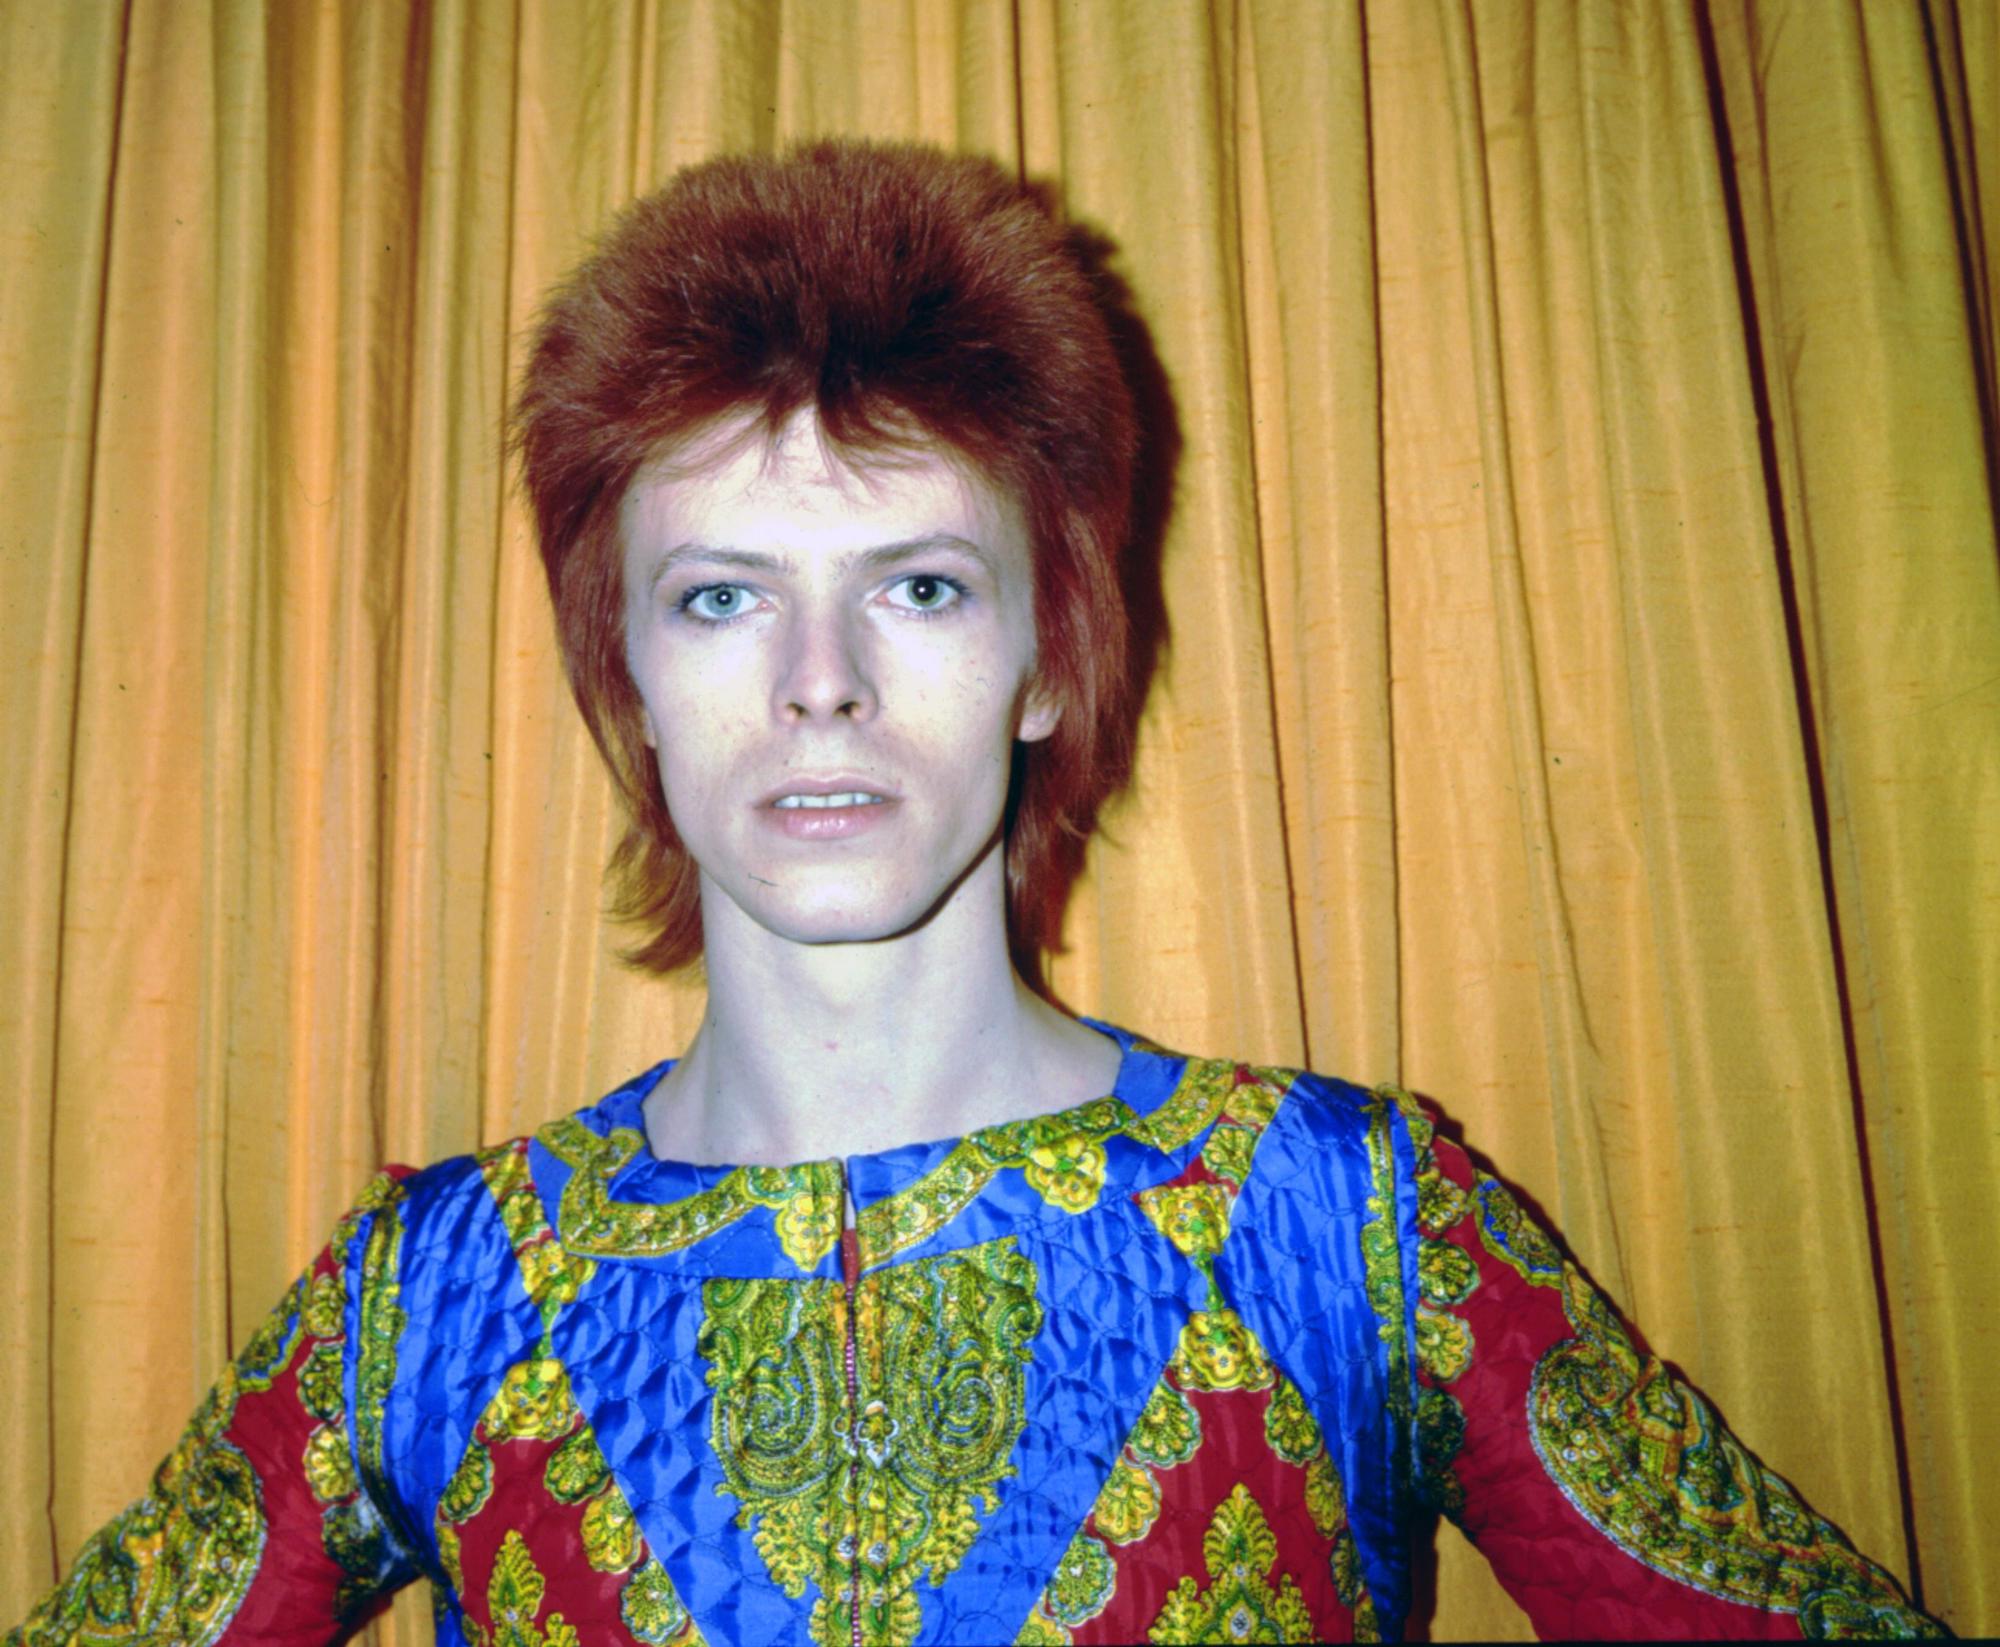 David Bowie standing in front of a yellow curtain dressed as 'Ziggy Stardust'